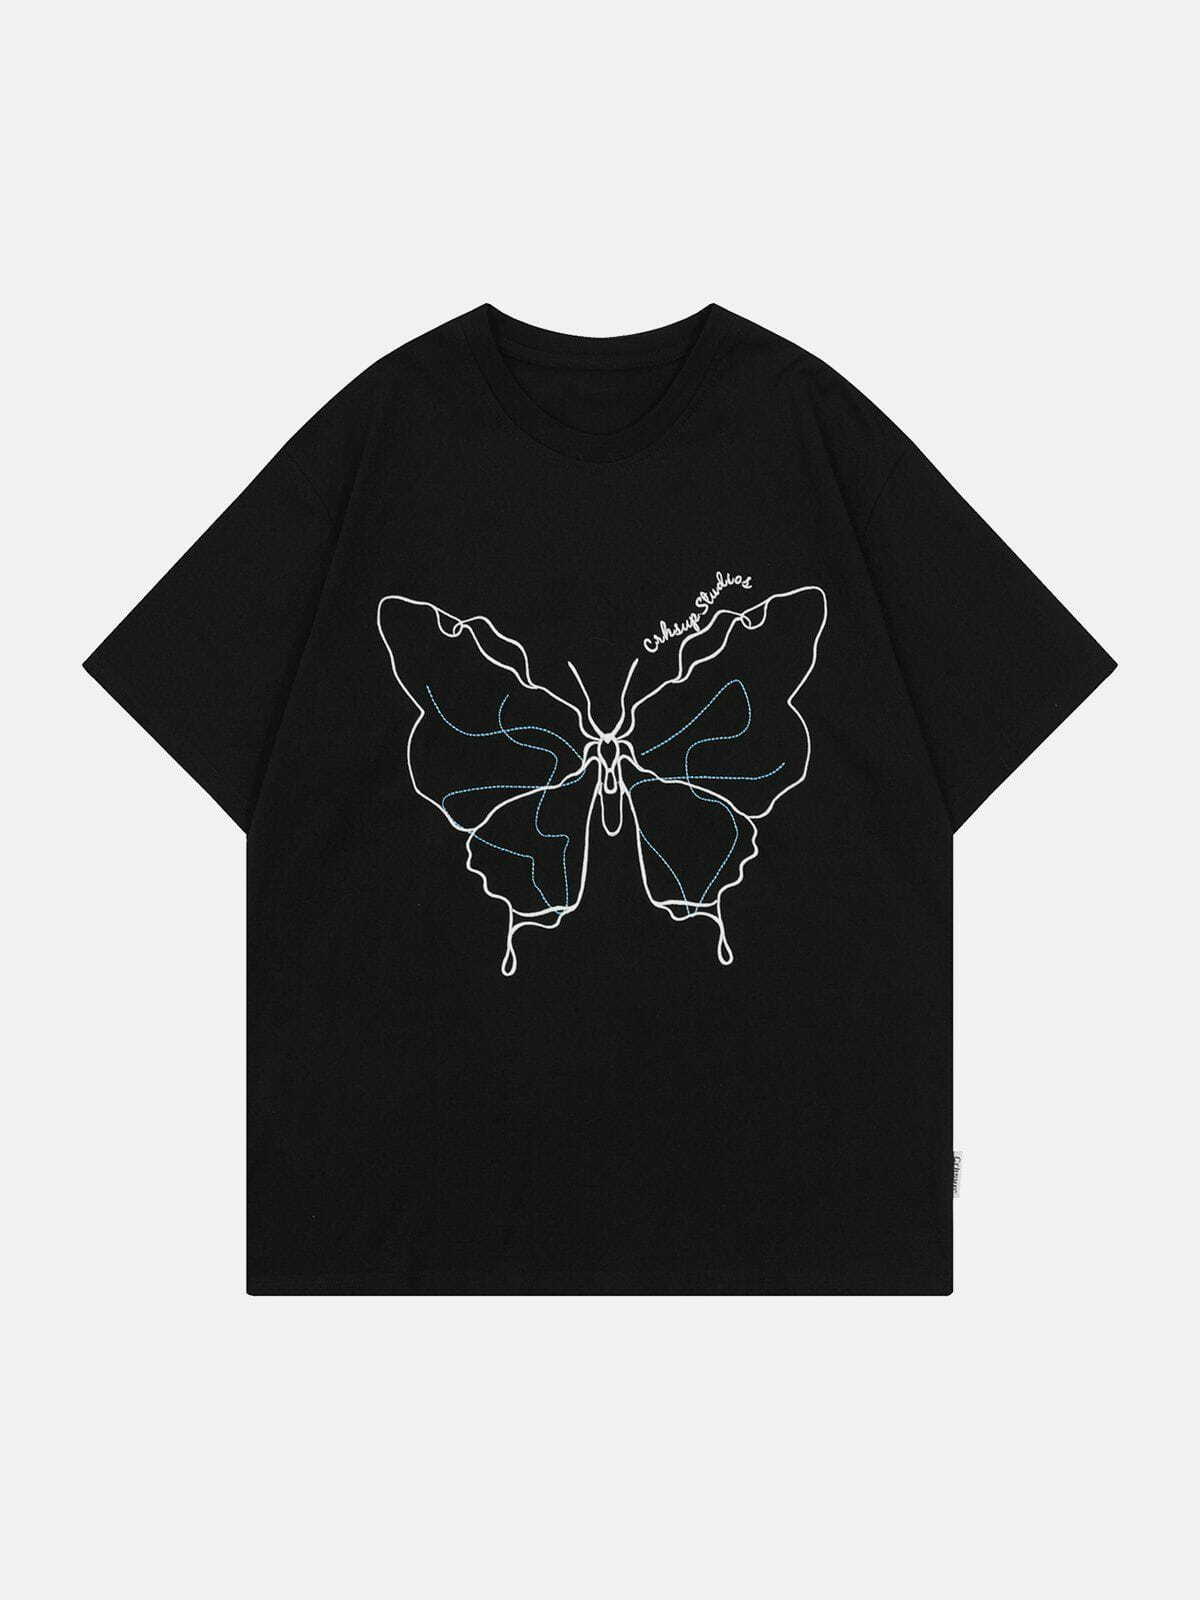 embroidered butterfly tee edgy retro streetwear shirt 6957